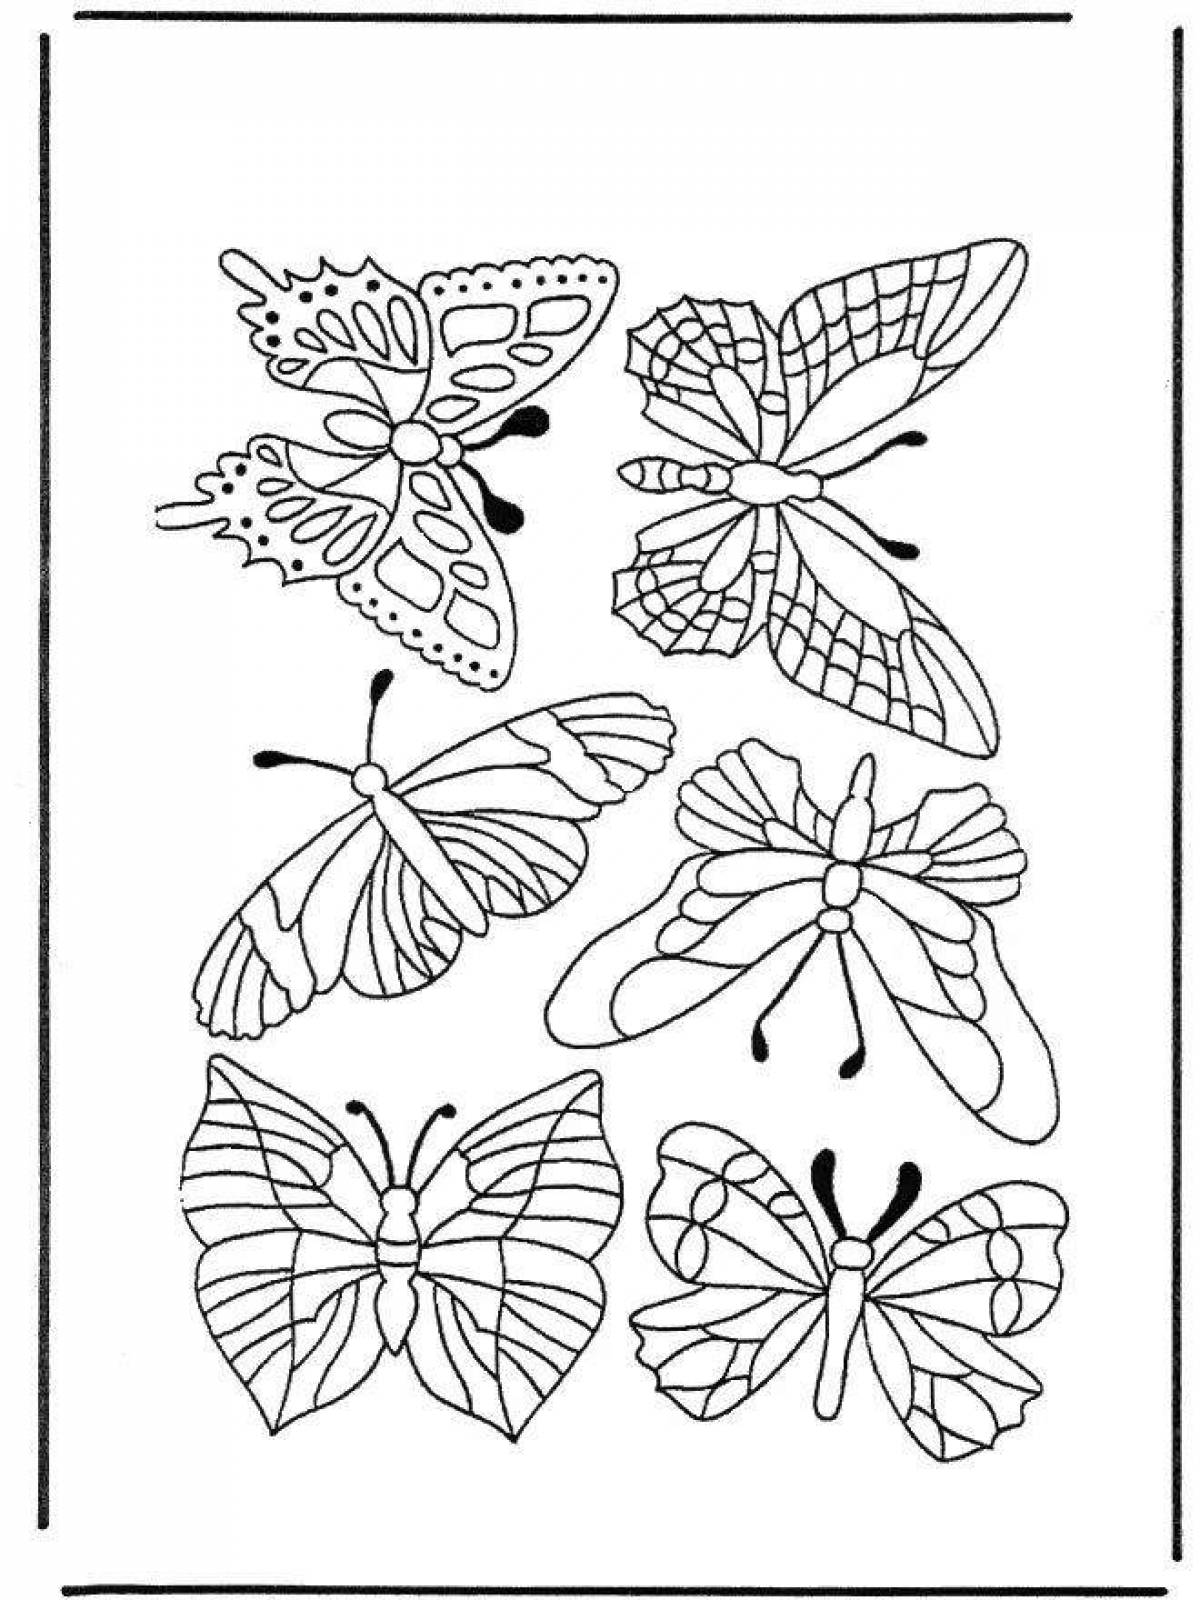 Fabulous coloring pages of butterflies